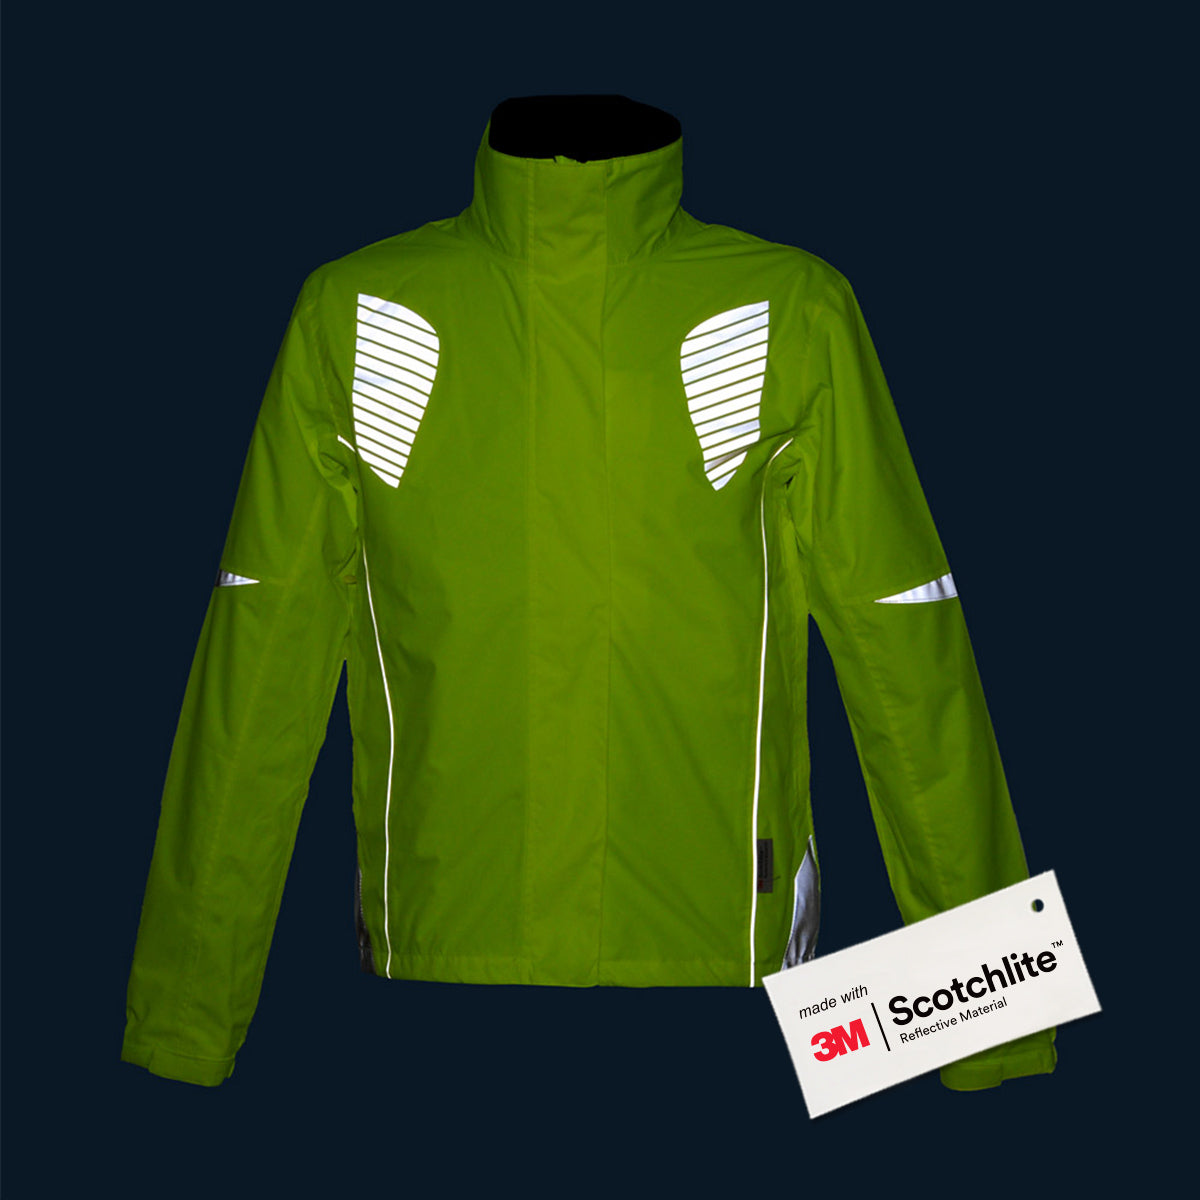 Image of front of cycling jacket in low lighting.